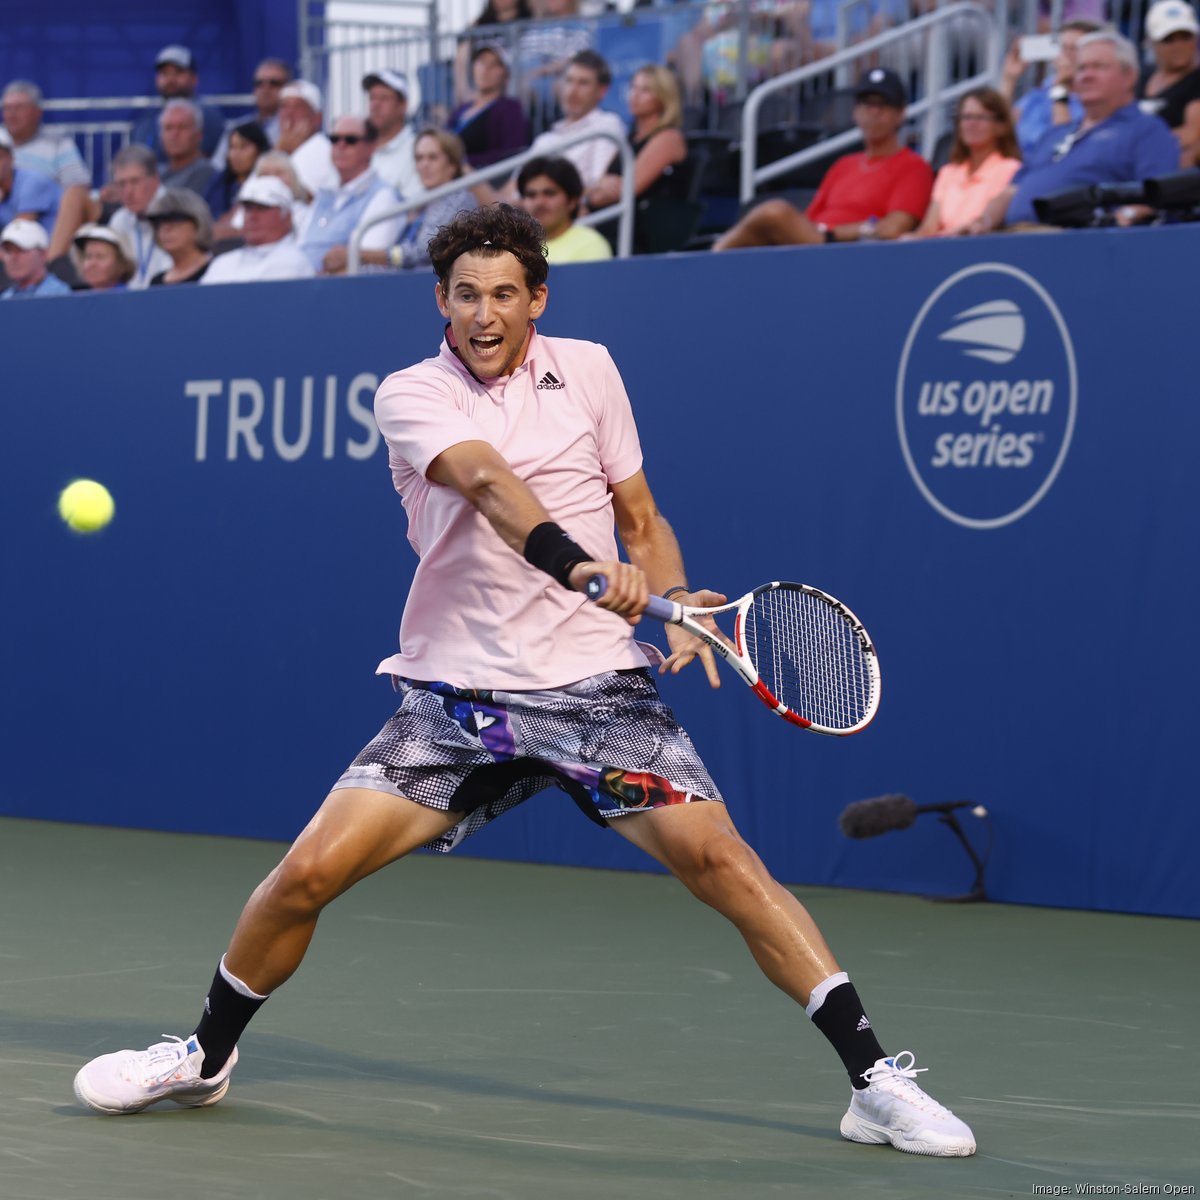 Dominic Thiem wins 1st match of 2023 at Argentina Open - NBC Sports